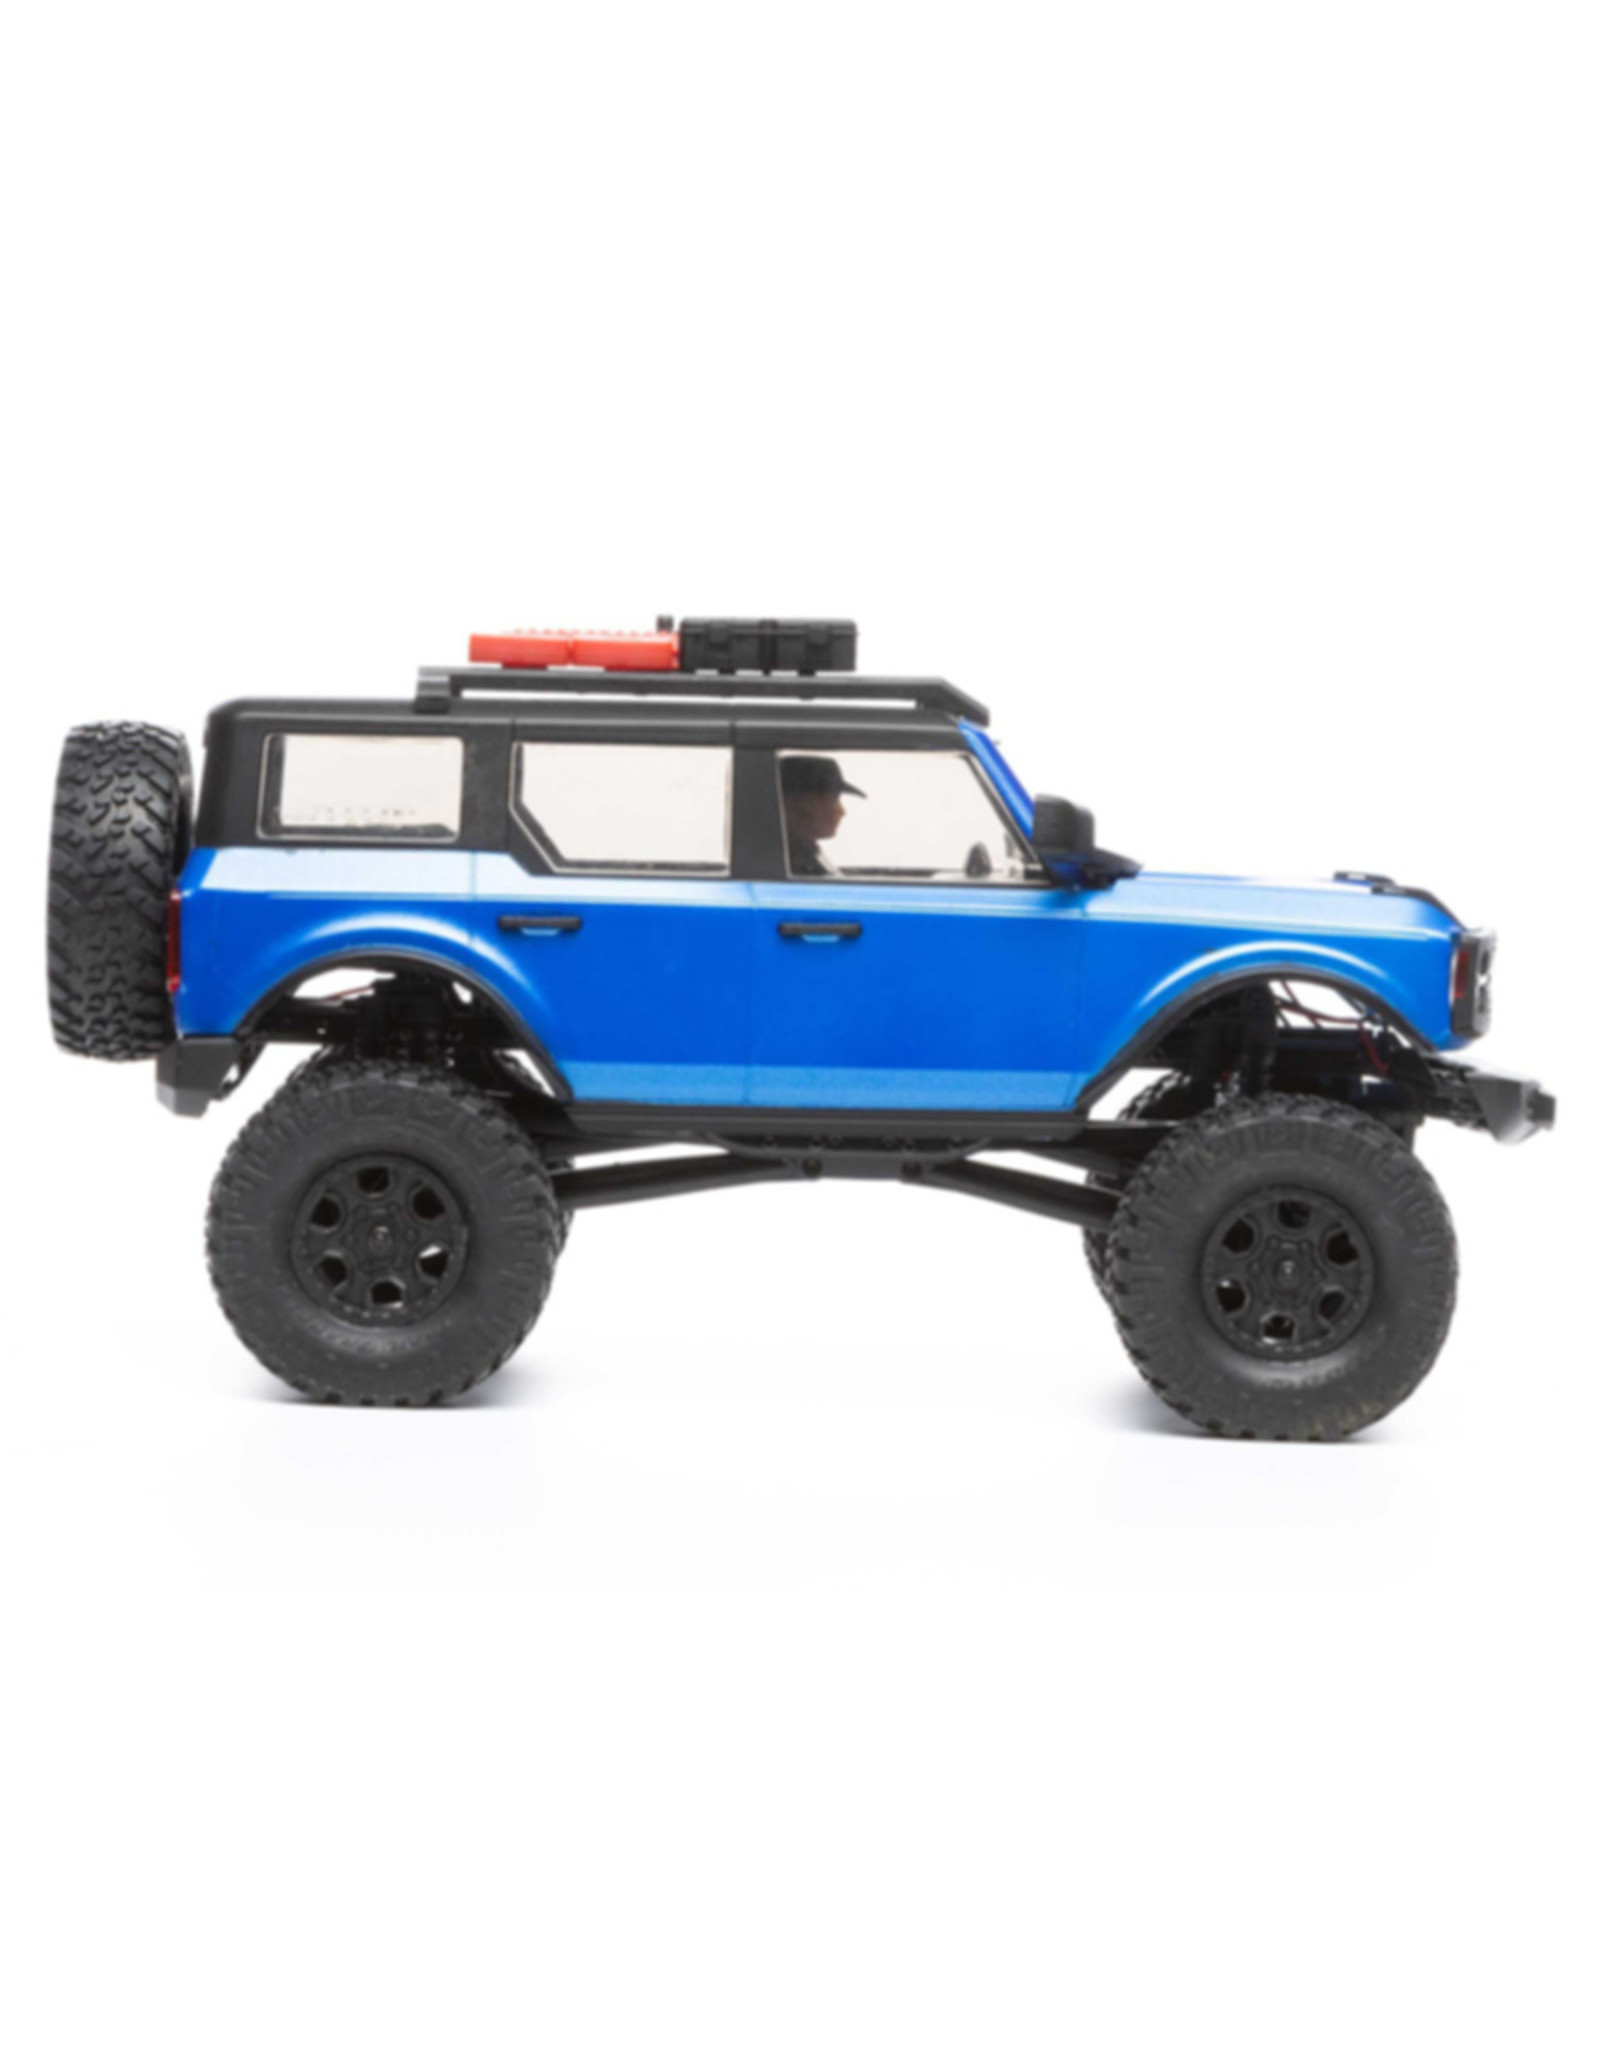 Axial AXI00006T3 1/24 SCX24 2021 Ford Bronco 4WD Truck RTR, Blue